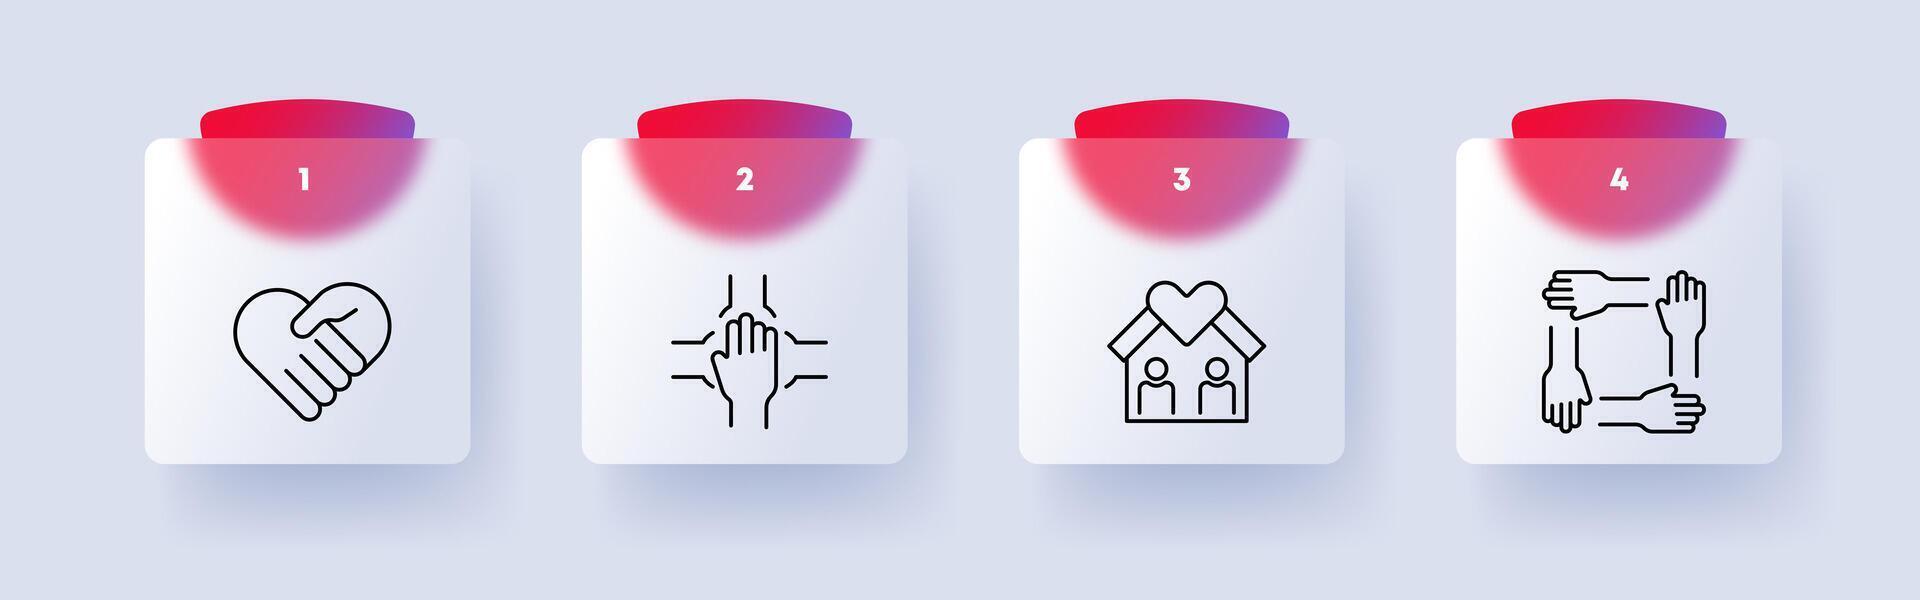 icon set command. Heart, hand, palm, silhouette, teamwork, square, figure, house, people, relationships, communication, numbering. All for one and one for all concept. Glassmorphism style. vector